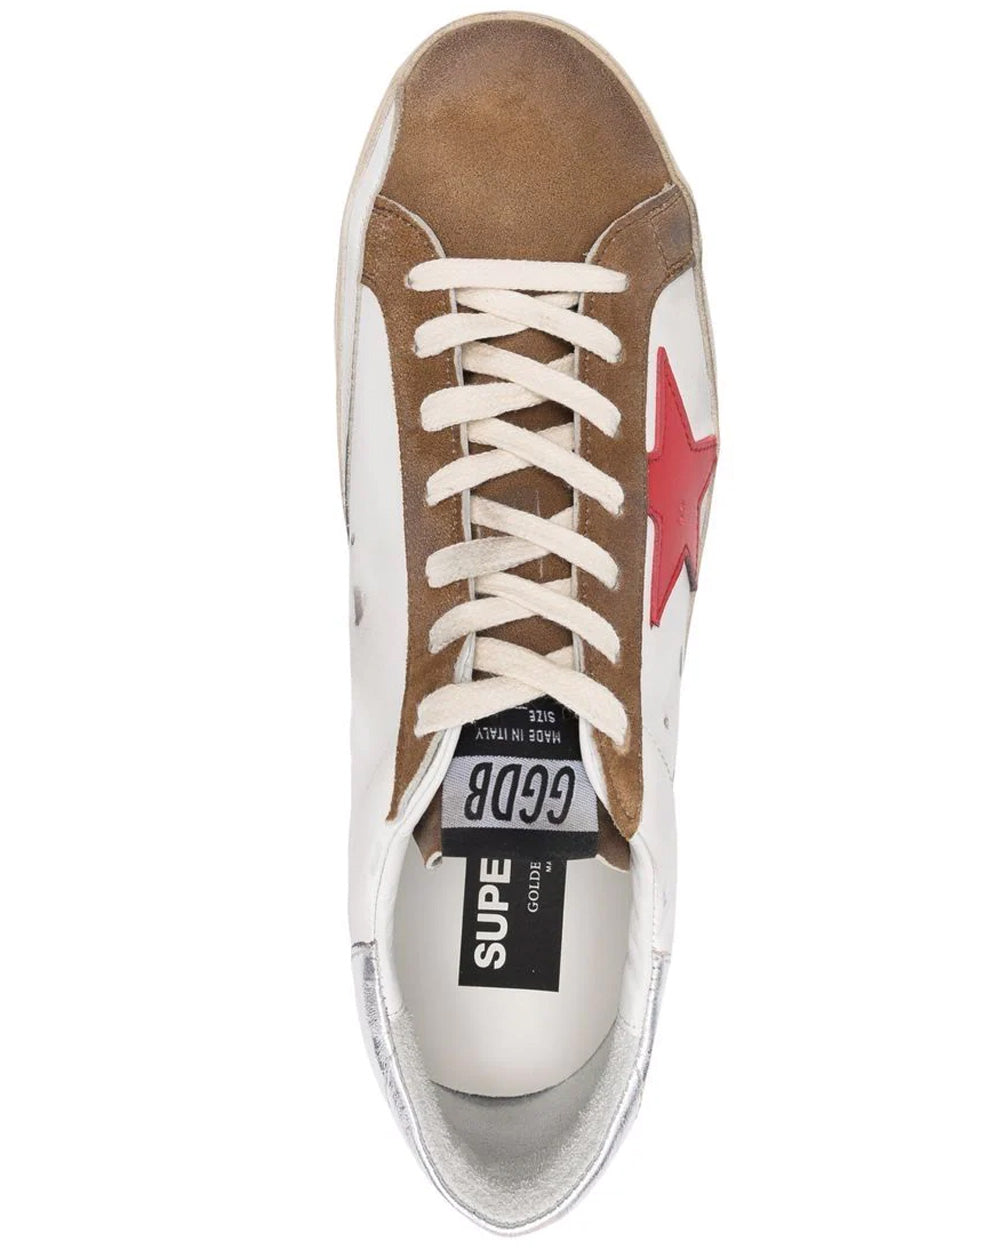 White and Brown Super-Star Classic Sneaker